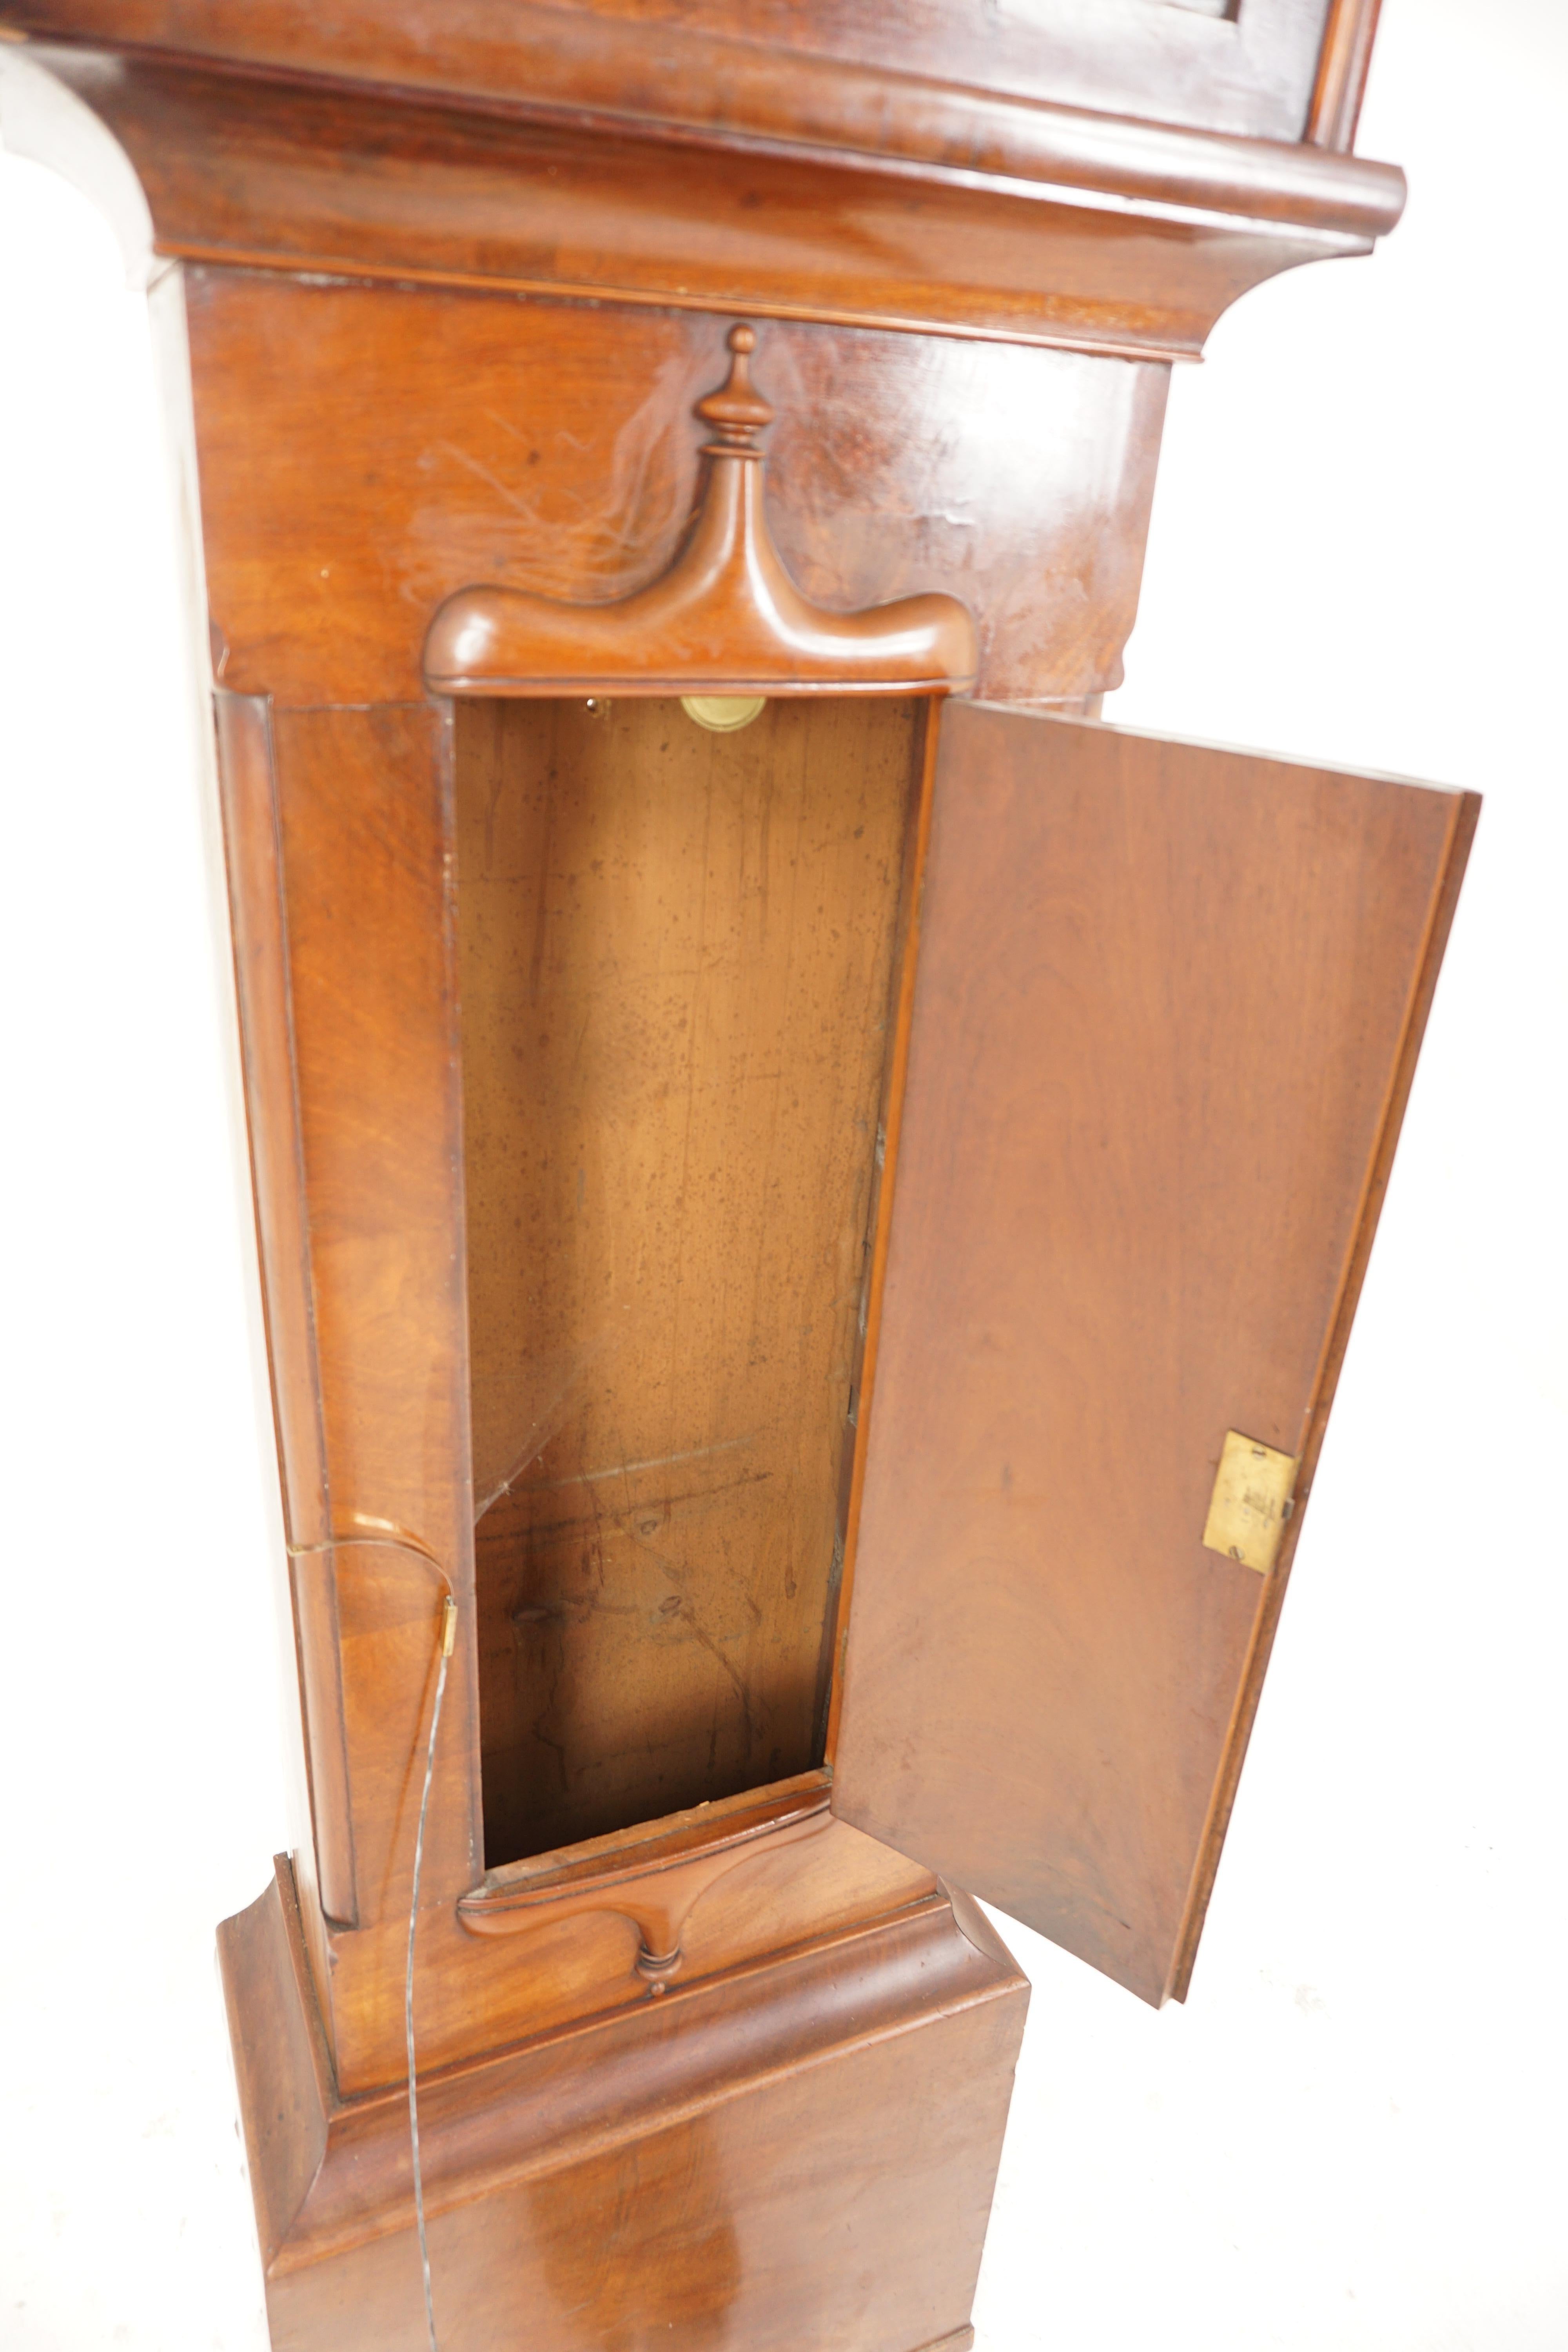 Vic. Grandfather Long Case Clock by Jas Huston of Johnstone, Scotland 1870 H182 3